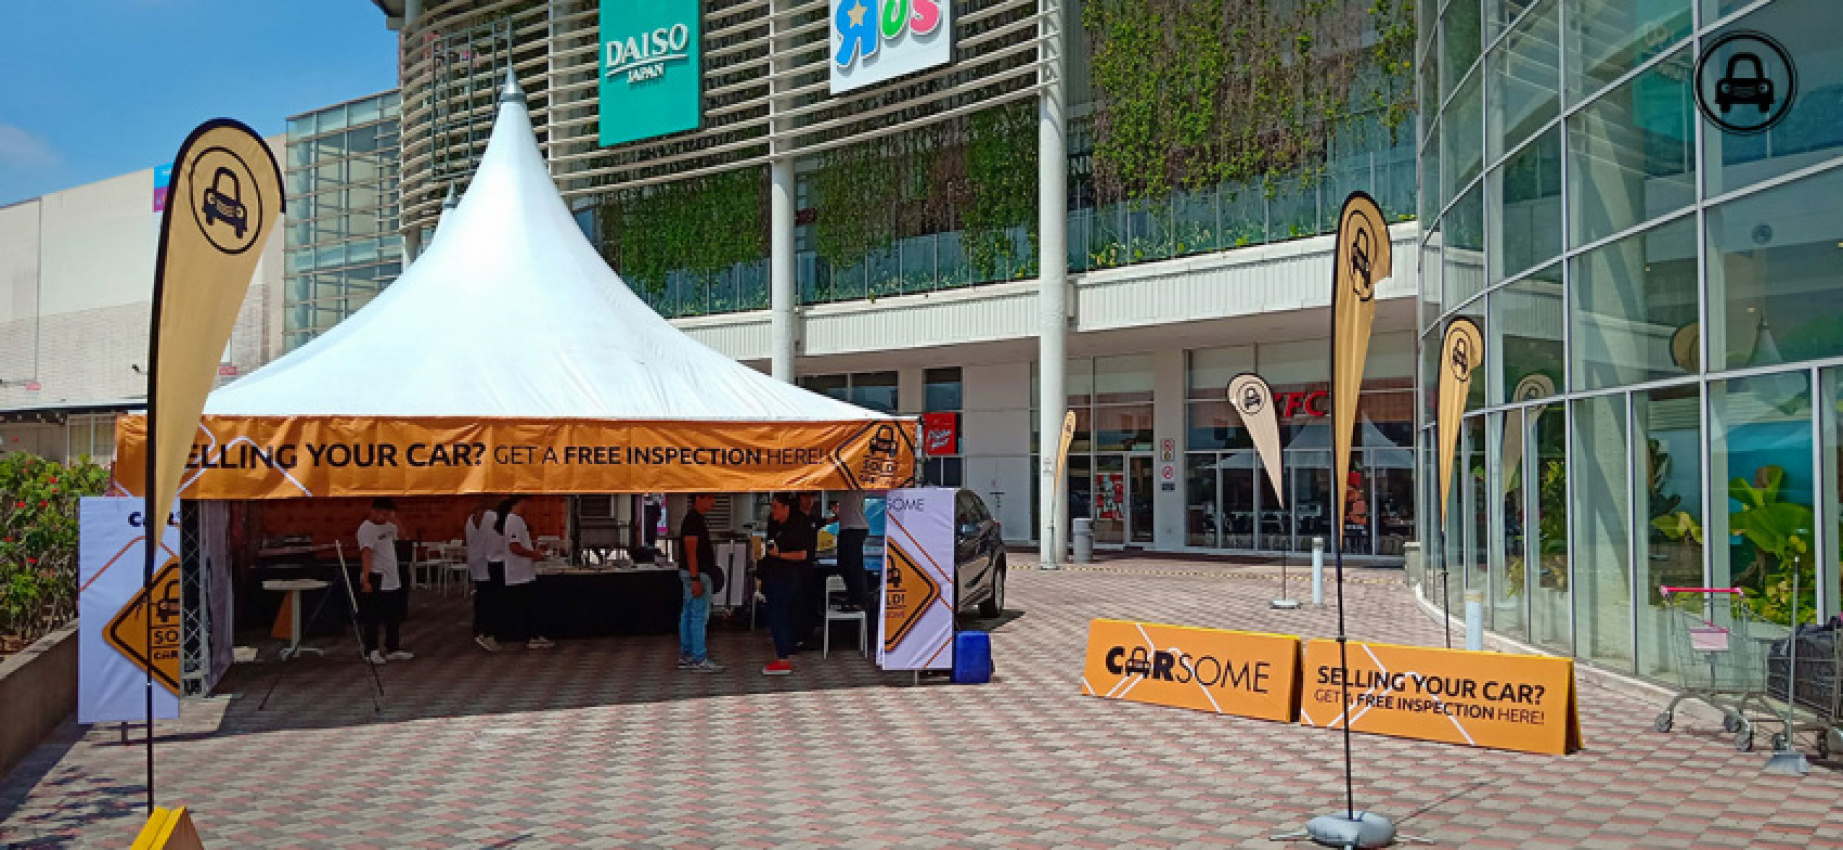 autos, cars, mini, news, come by carsome’s mini carnival in johor bahru this weekend!